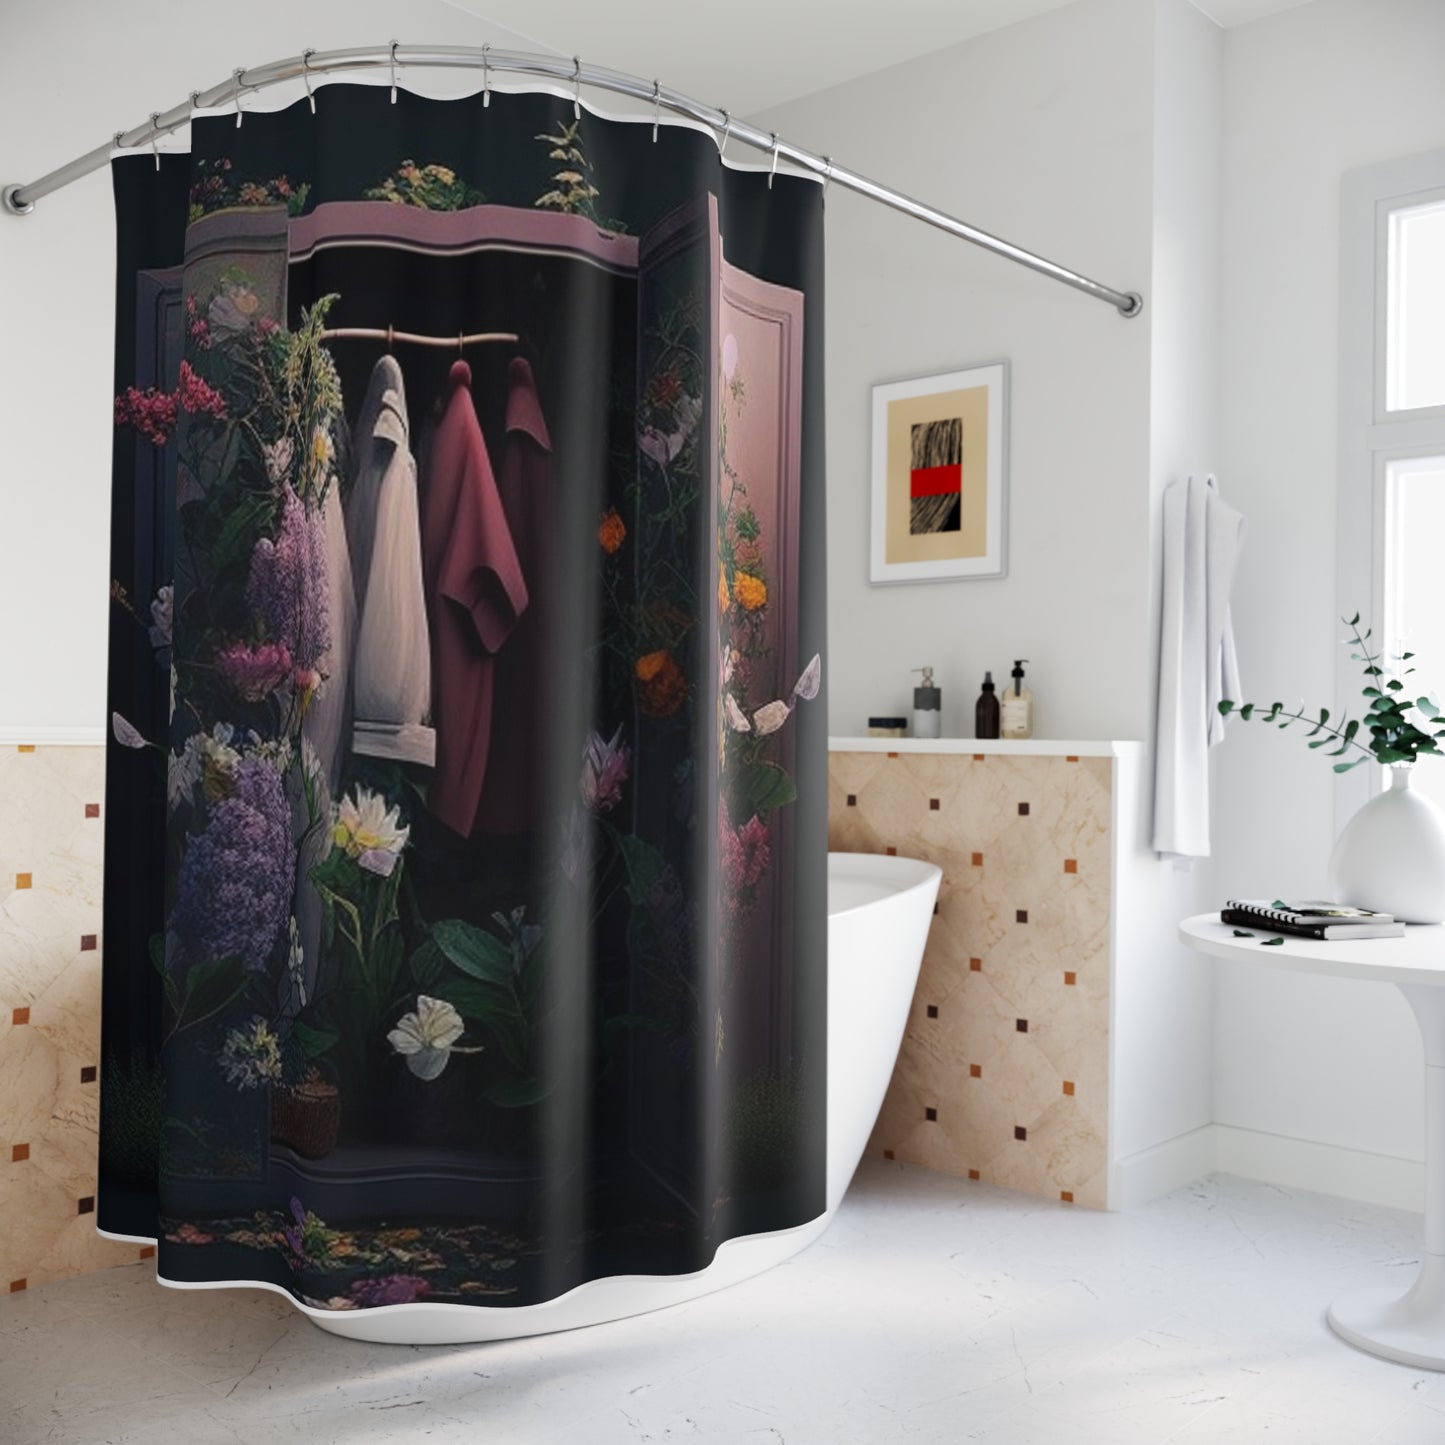 Polyester Shower Curtain A Wardrobe Surrounded by Flowers 2